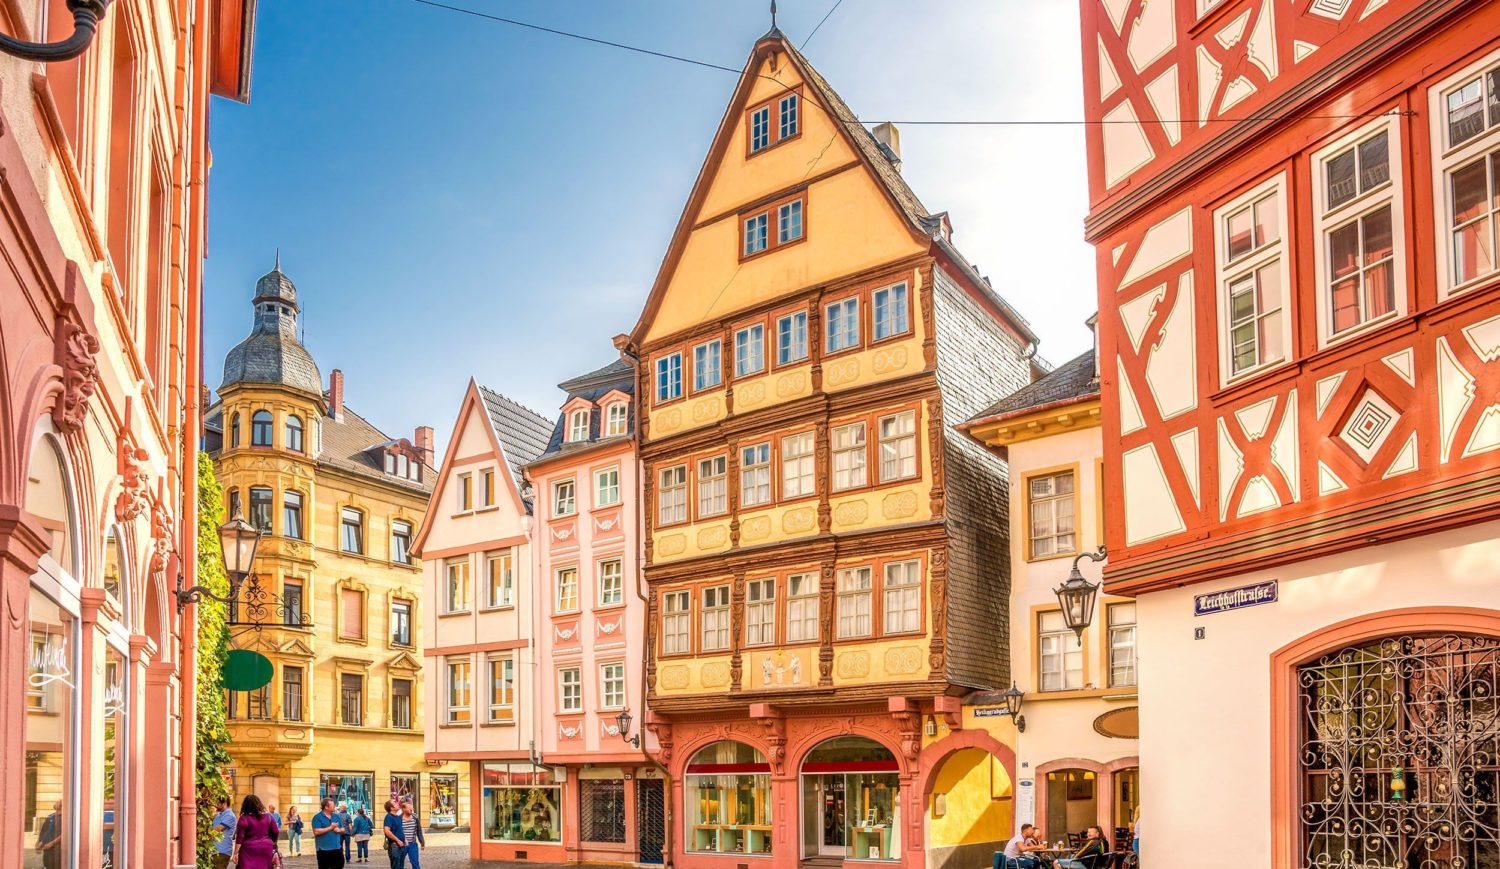 The half-timbered facades in Mainz have been renovated with great attention to ornamental details